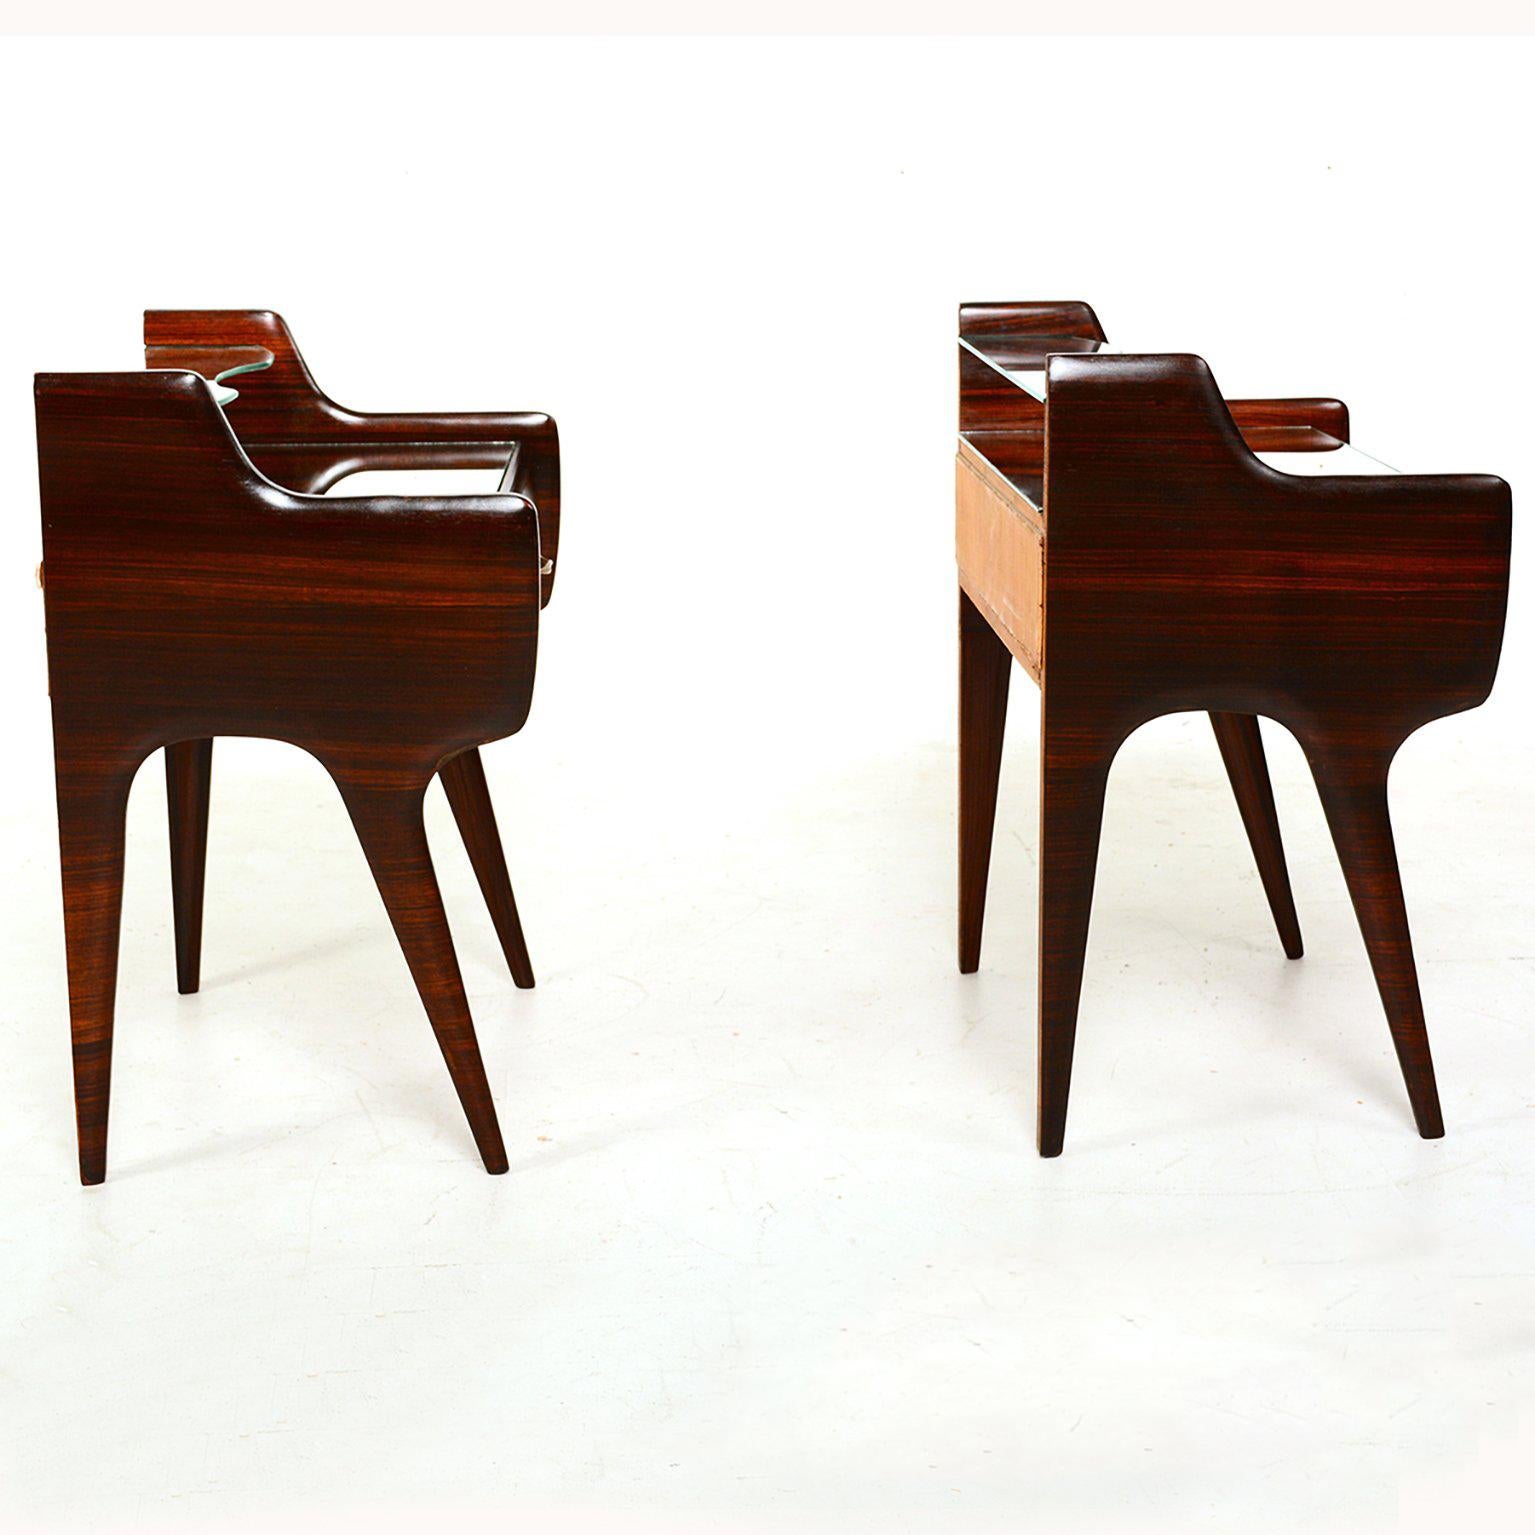 Mid-Century Modern Pair of Italian Bed Side Tables or Nightstands after Ico Parisi